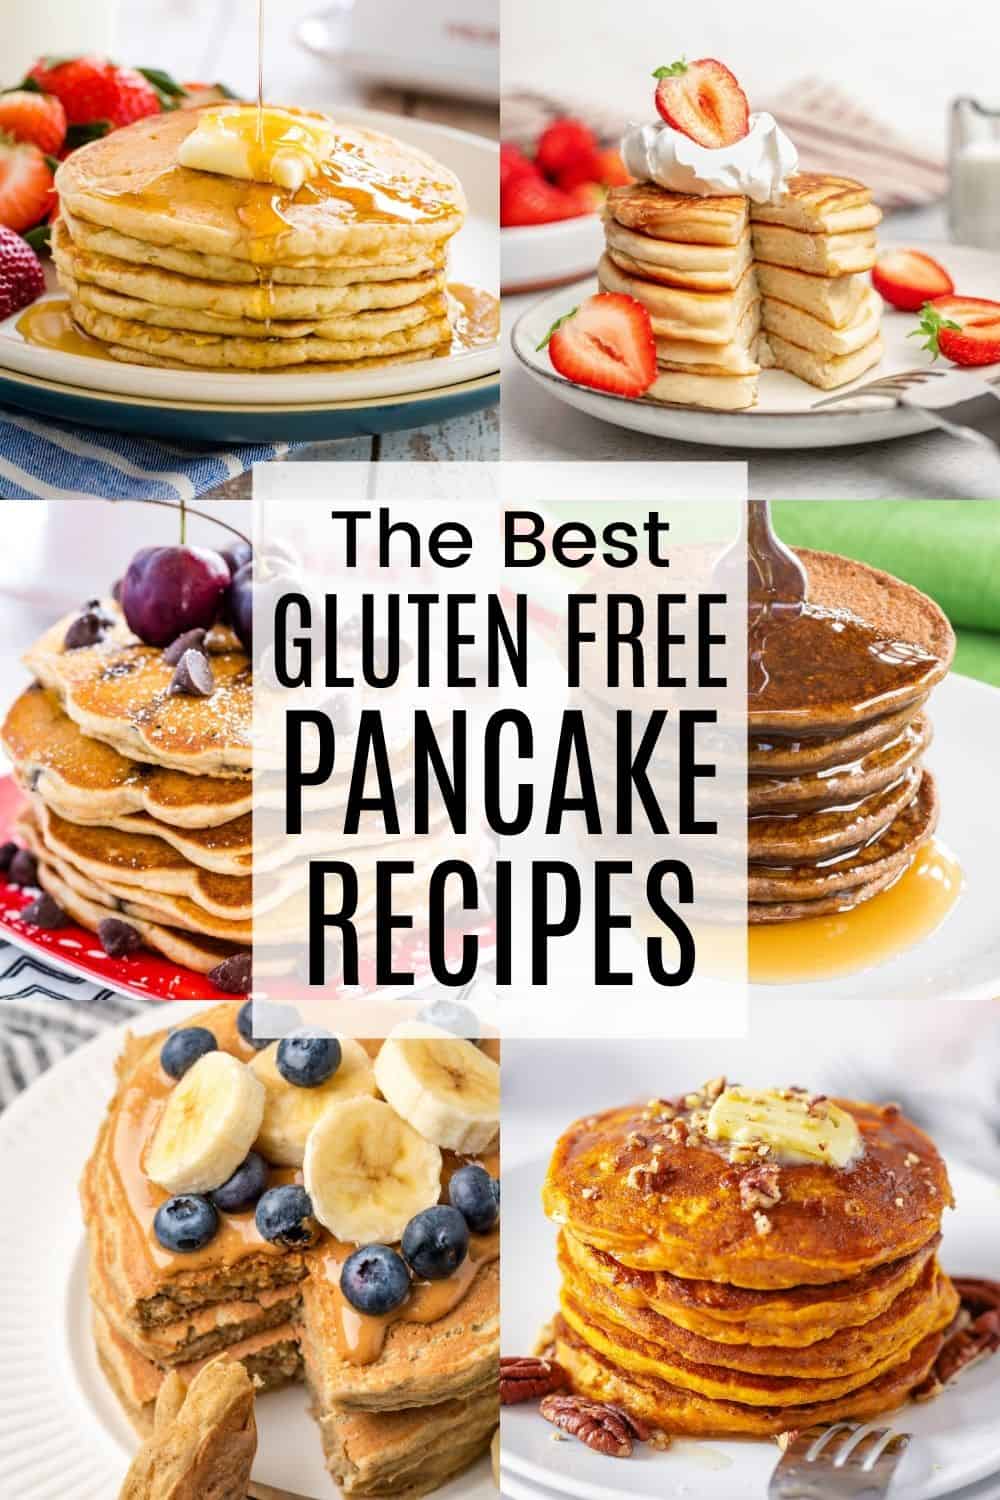 A two-by-three collage of different types of pancakes with a translucent white box in the middle with text overlay that says "The Best Gluten Free Pancake Recipes".